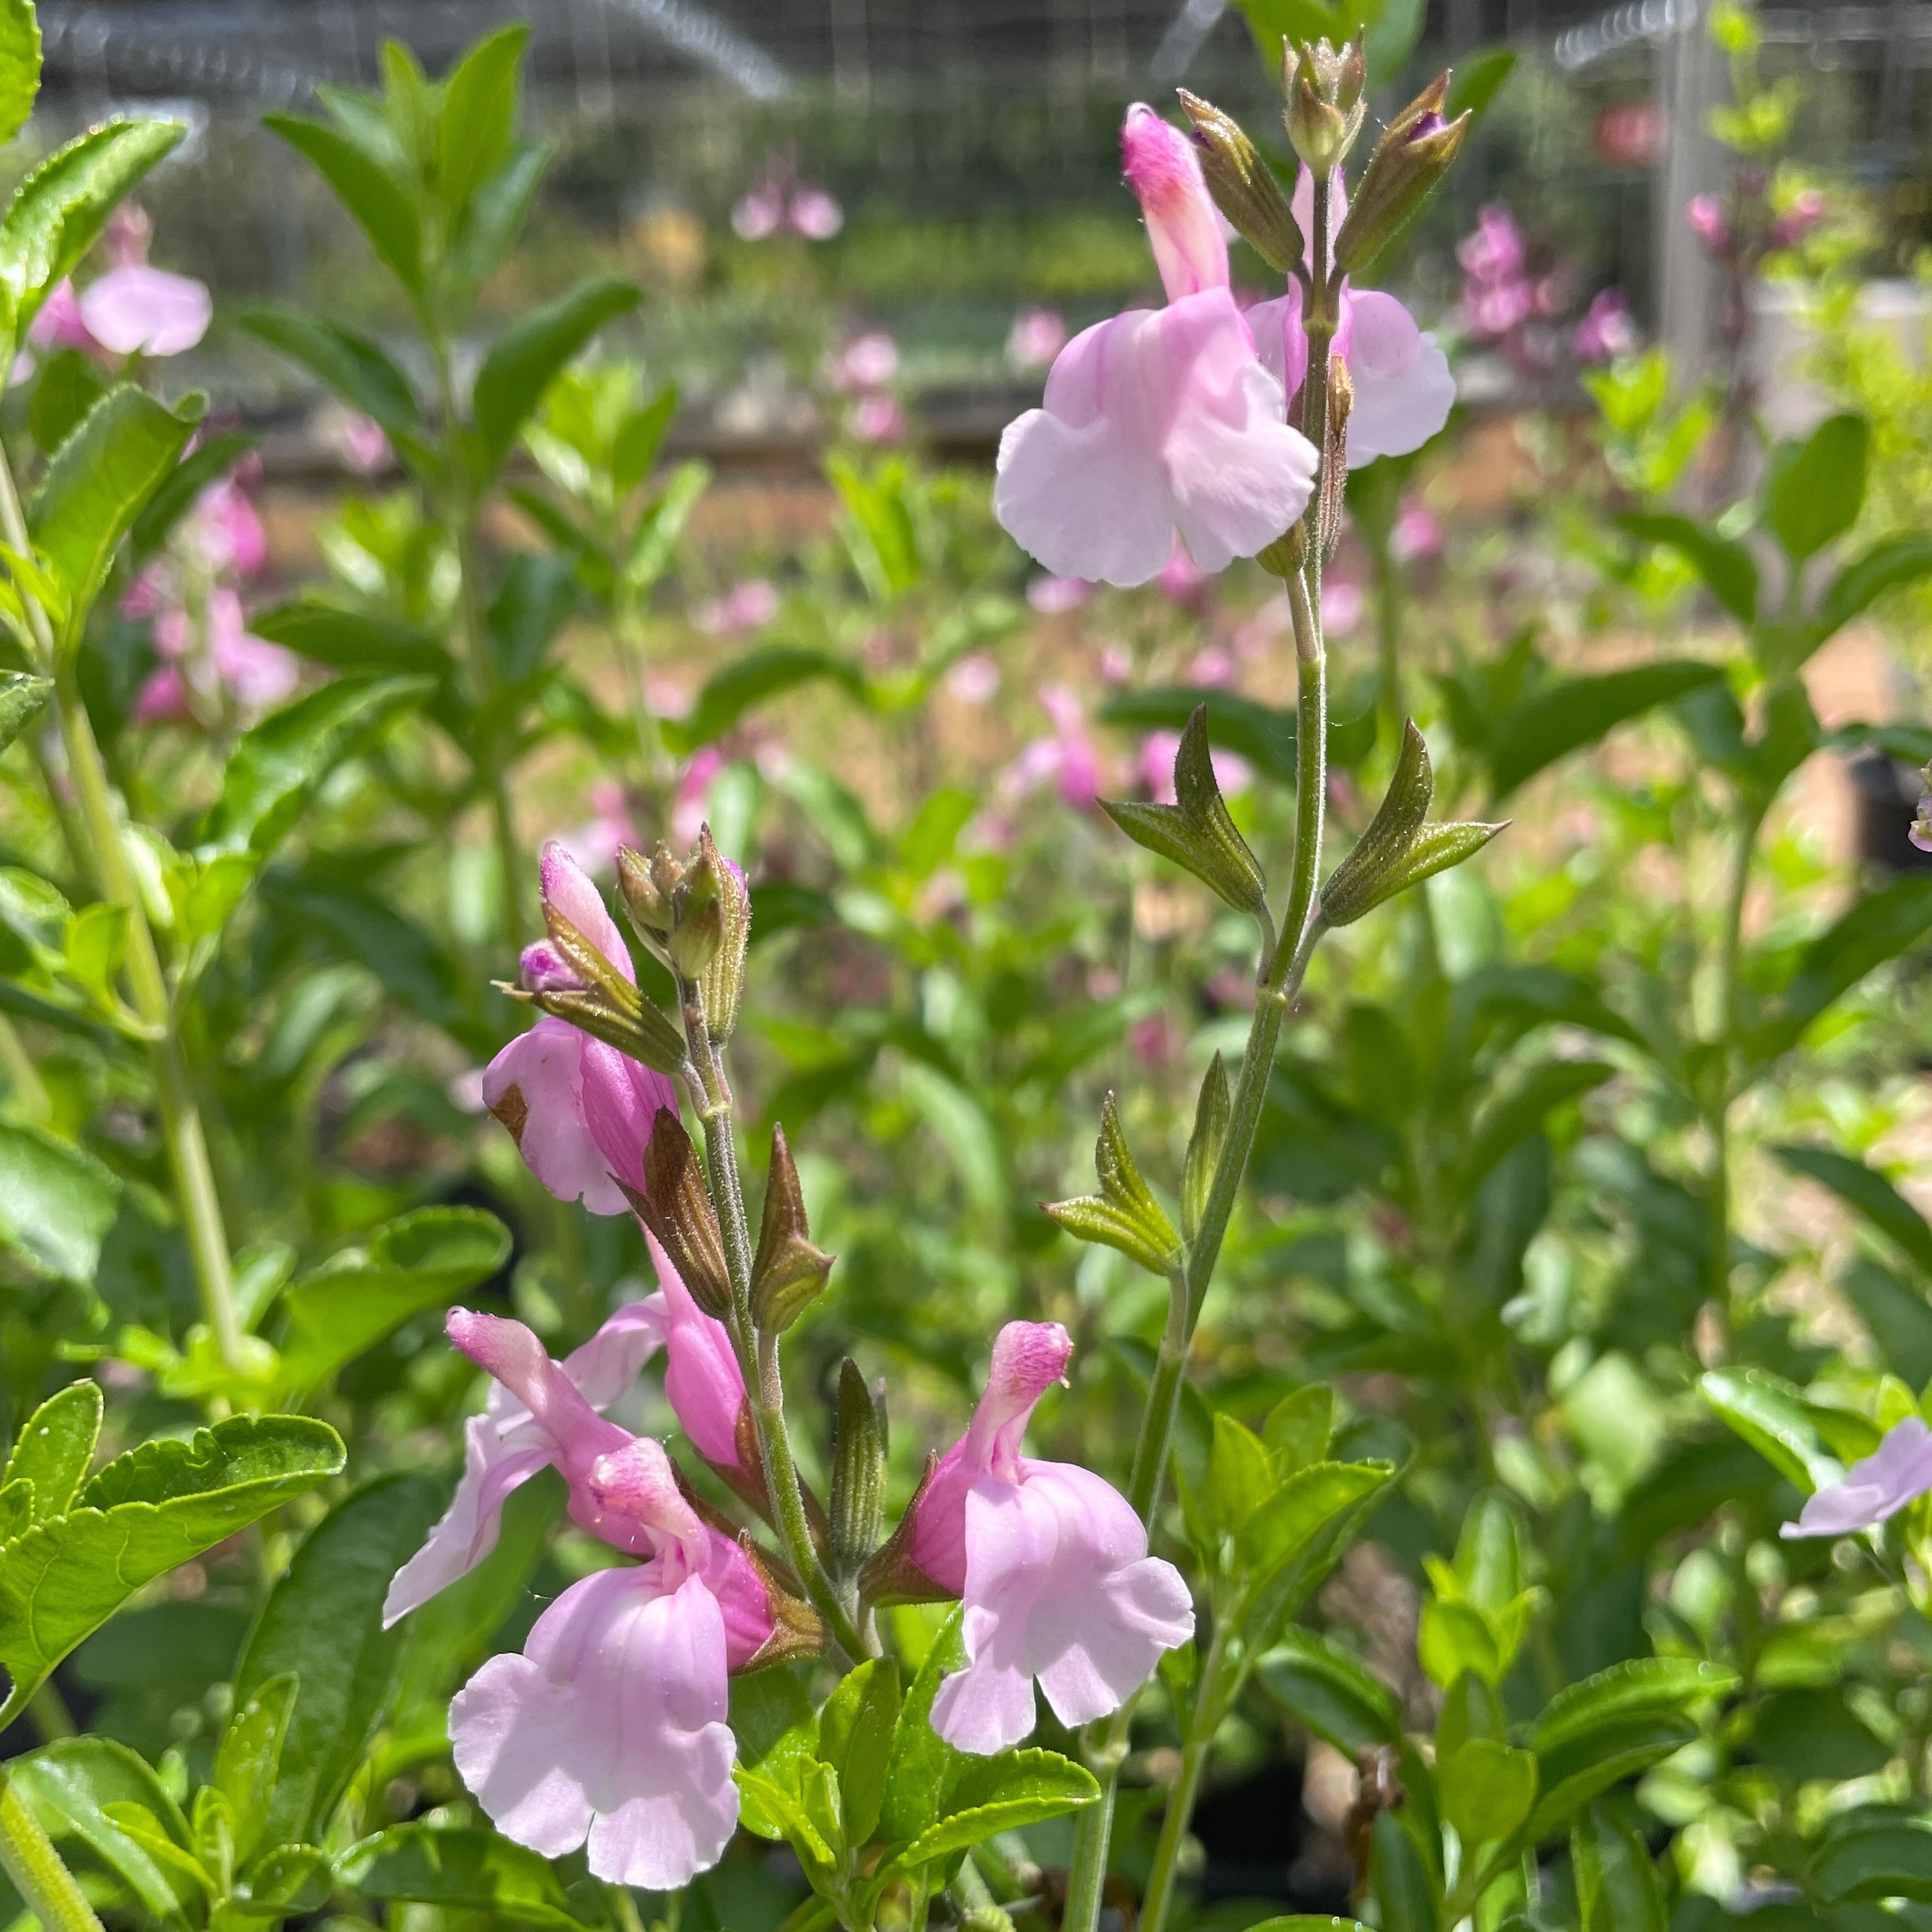 Light pink flowers bloom from a plant